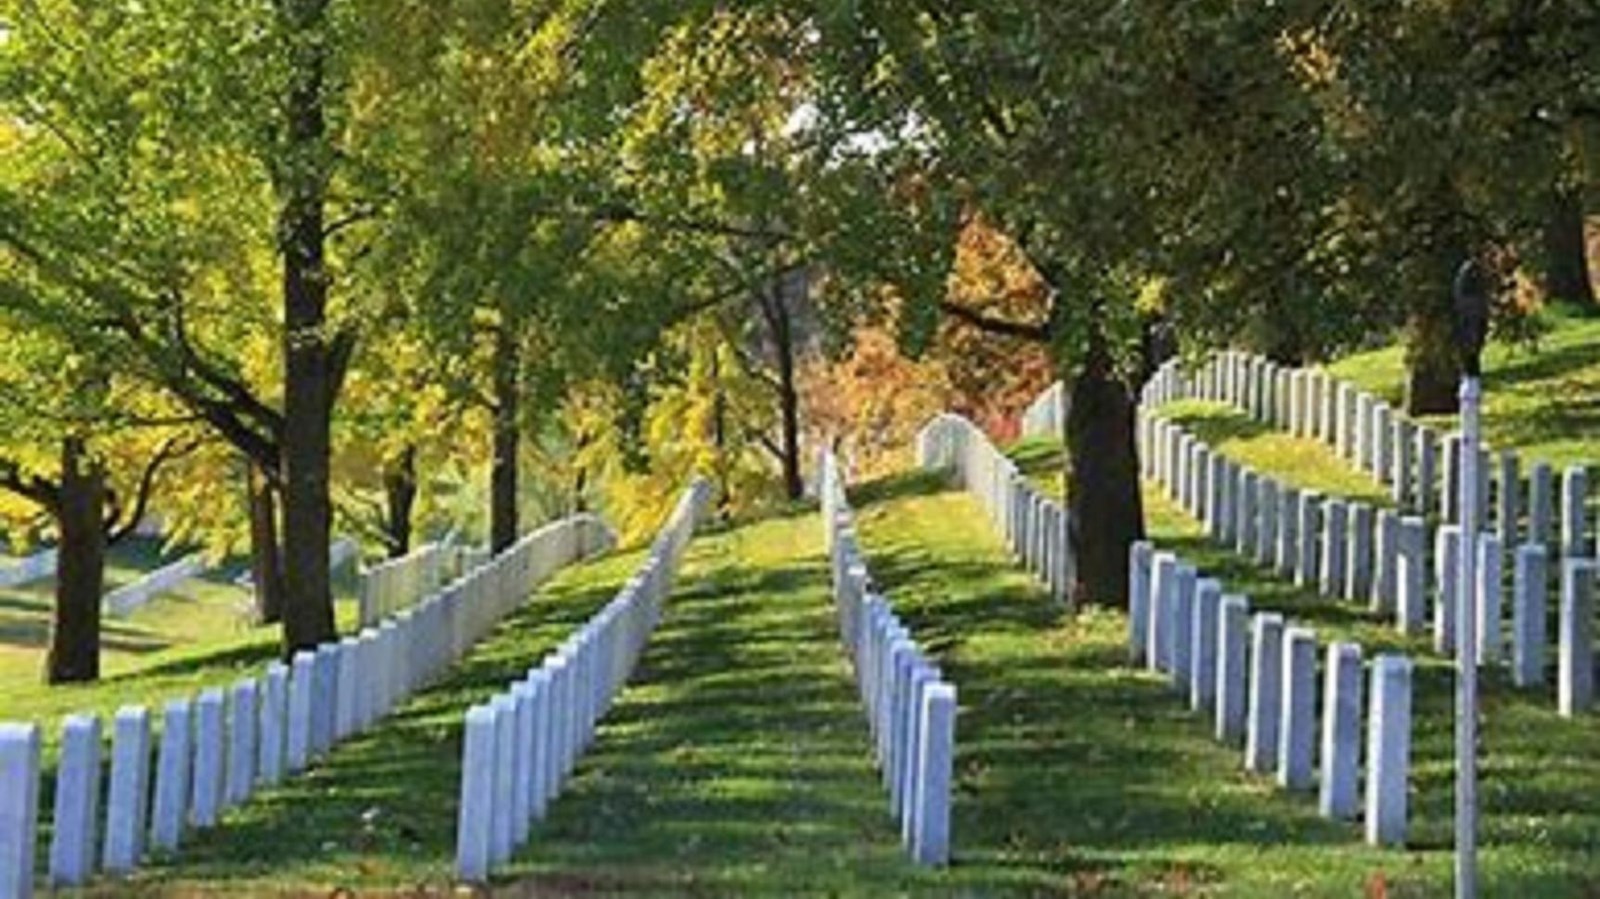 Gray gravestones in lines going across grassy area with trees spread out. 